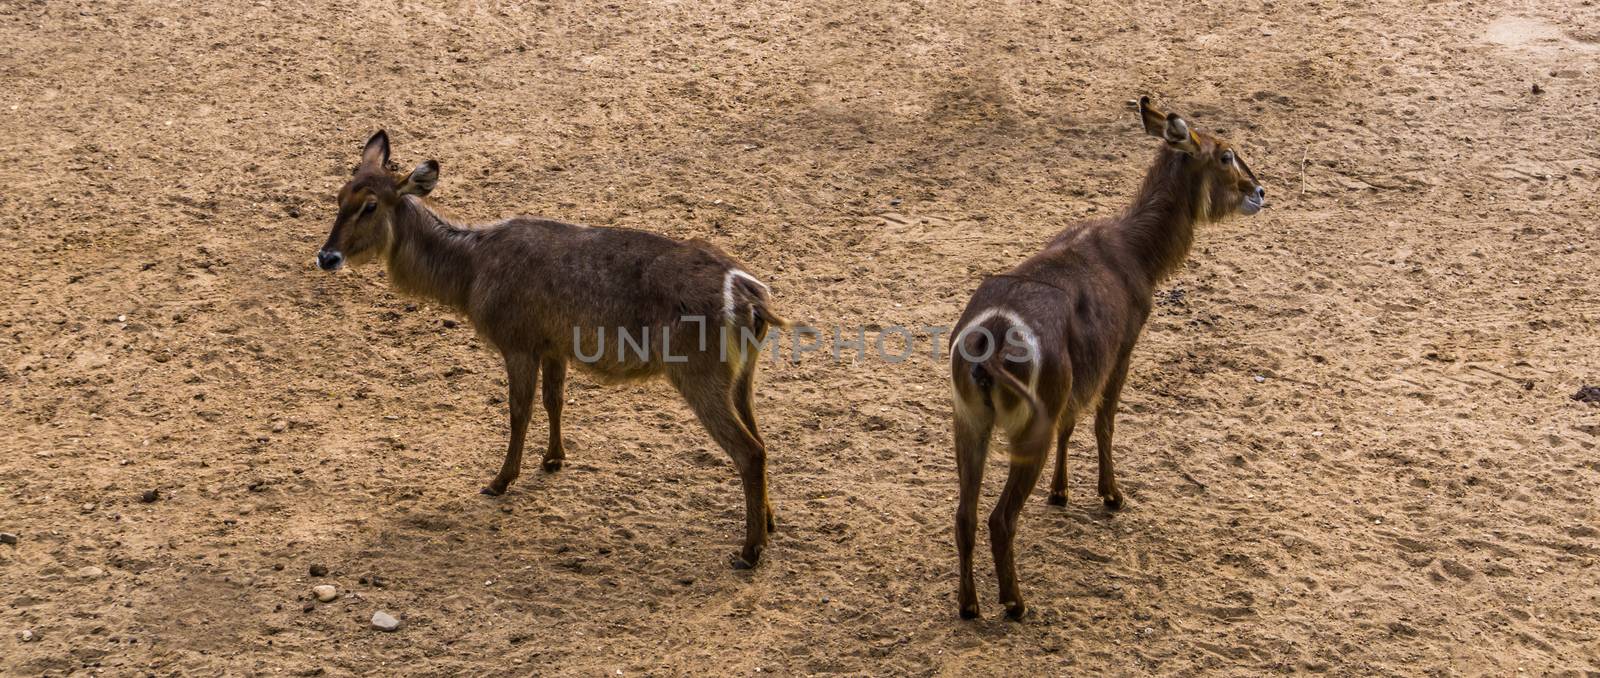 ellipsen waterbuck couple together, tropical antelope specie from Africa by charlottebleijenberg